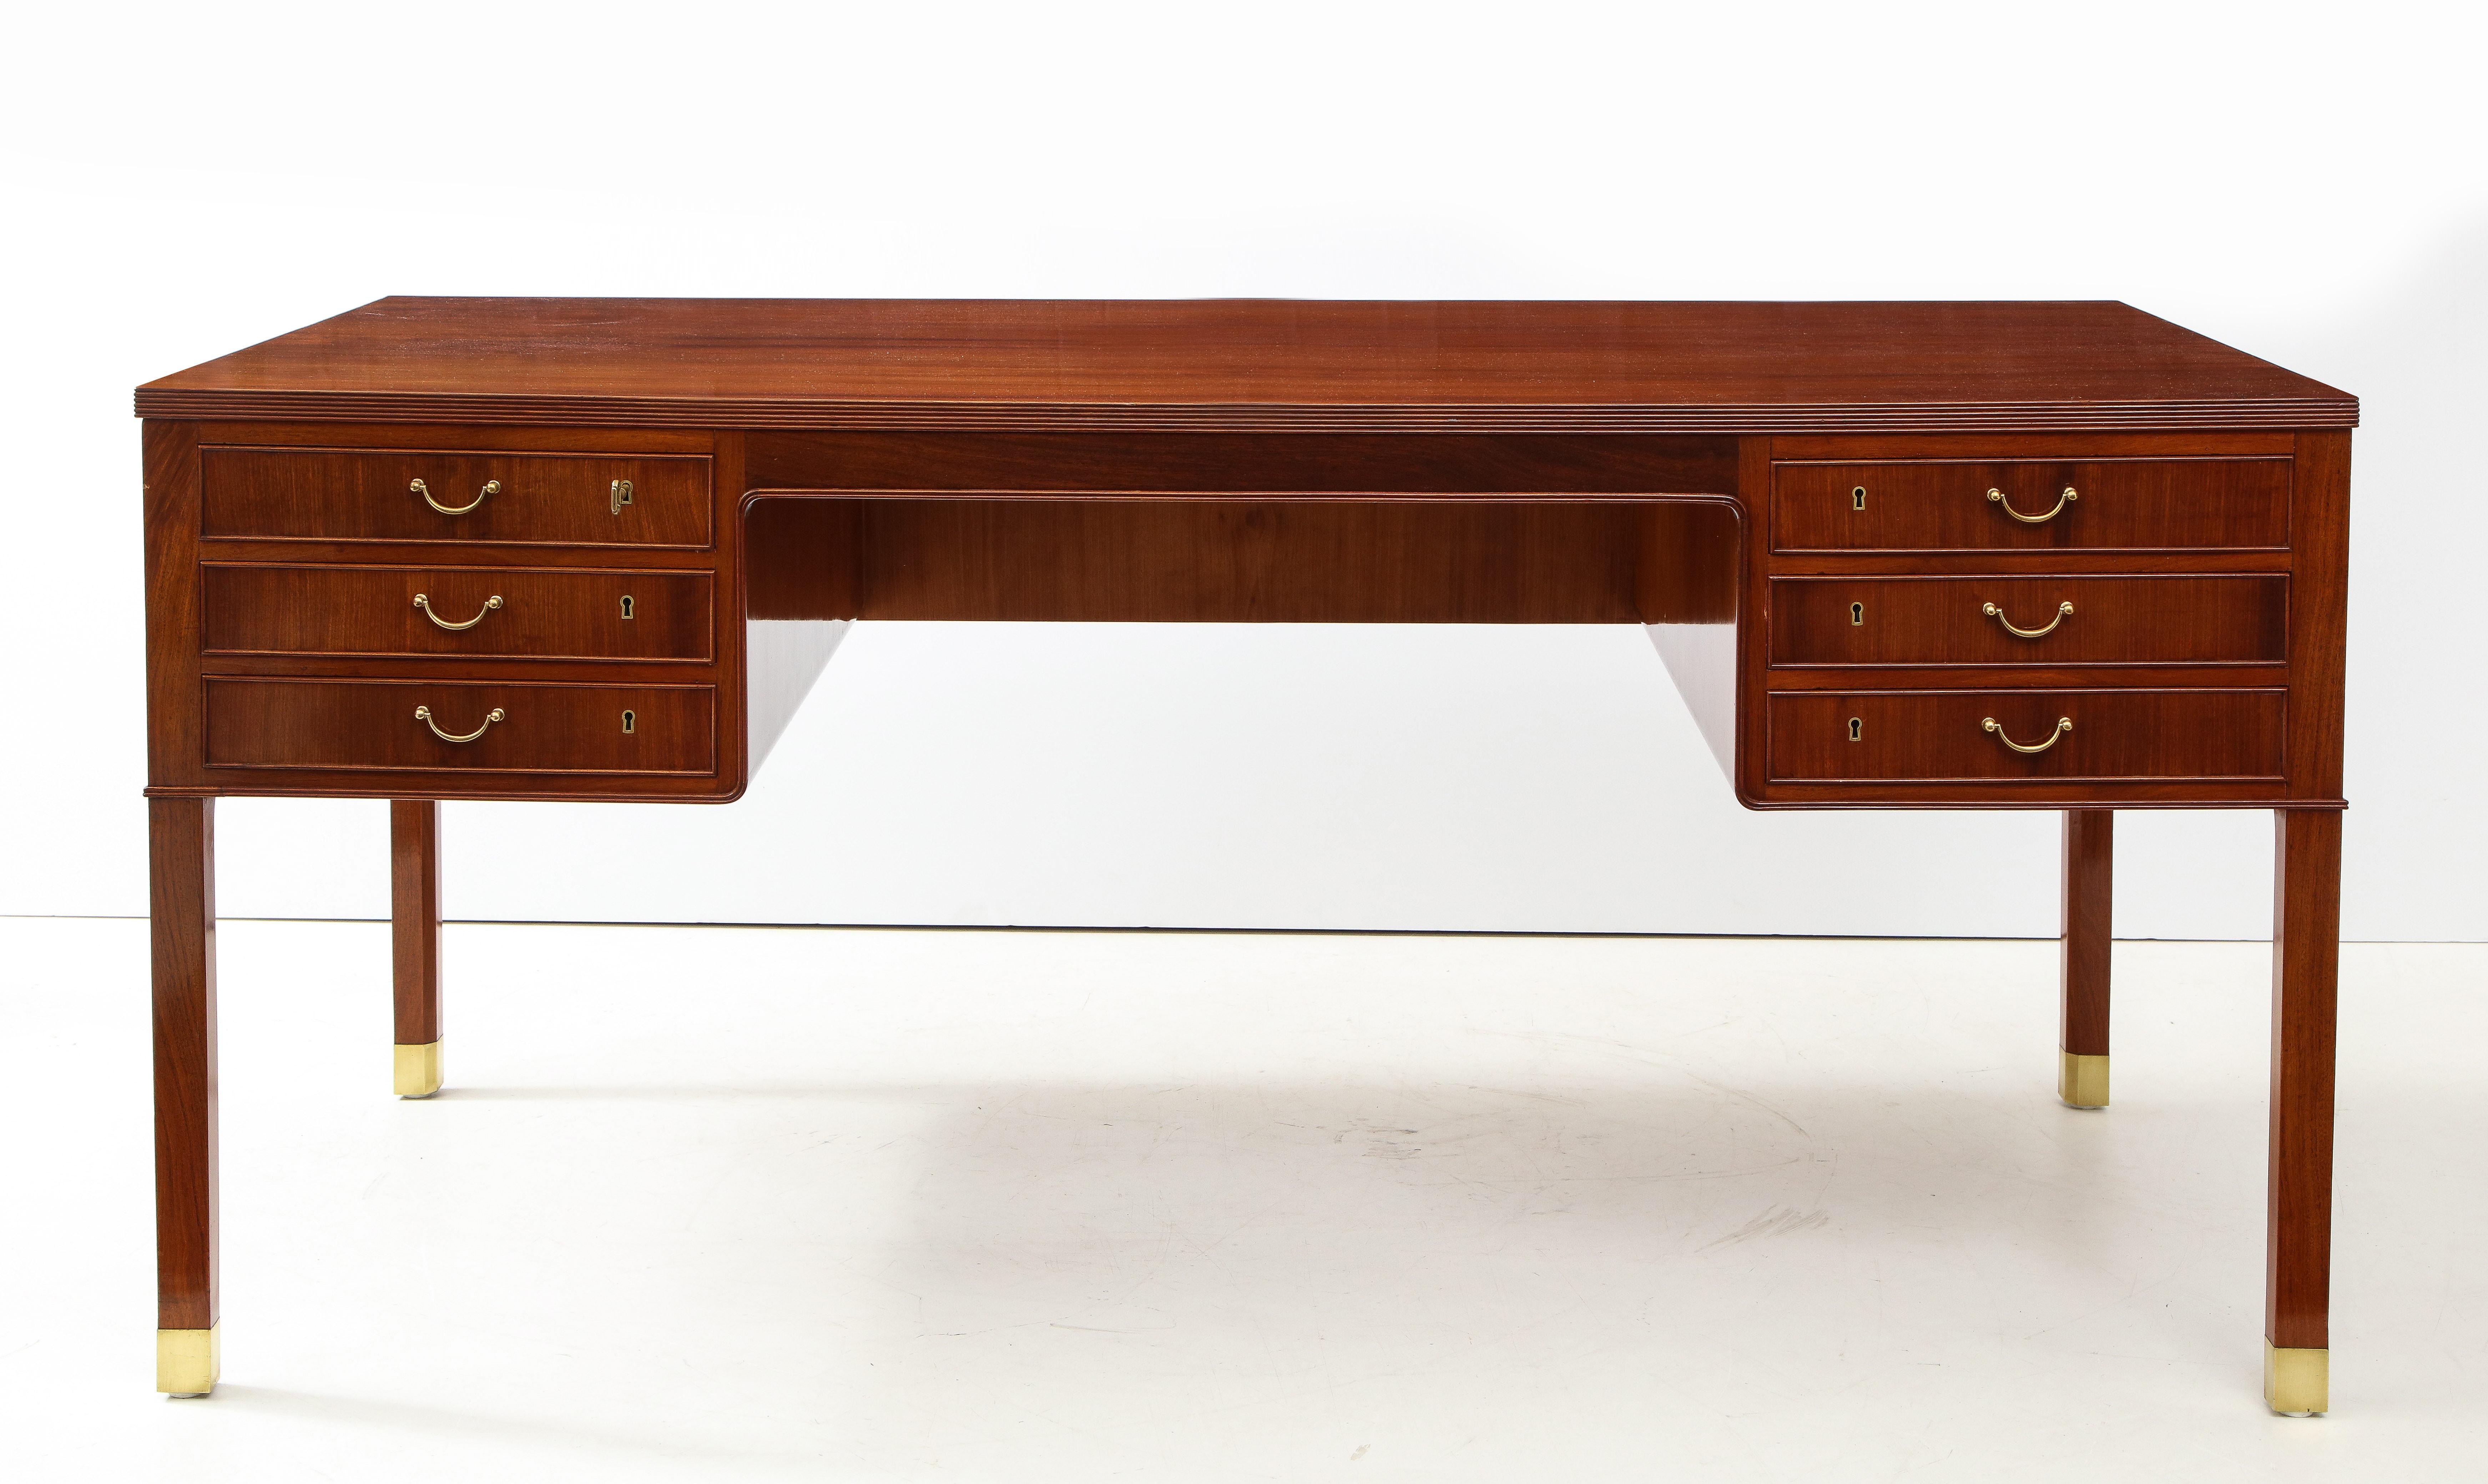 A Danish mahogany and brass-mounted desk designed by Ole Wanscher and produced by A.J. Iversen, circa 1950s. The rectangular top with a reeded edge above six drawers raised on square legs ending with brass caps.